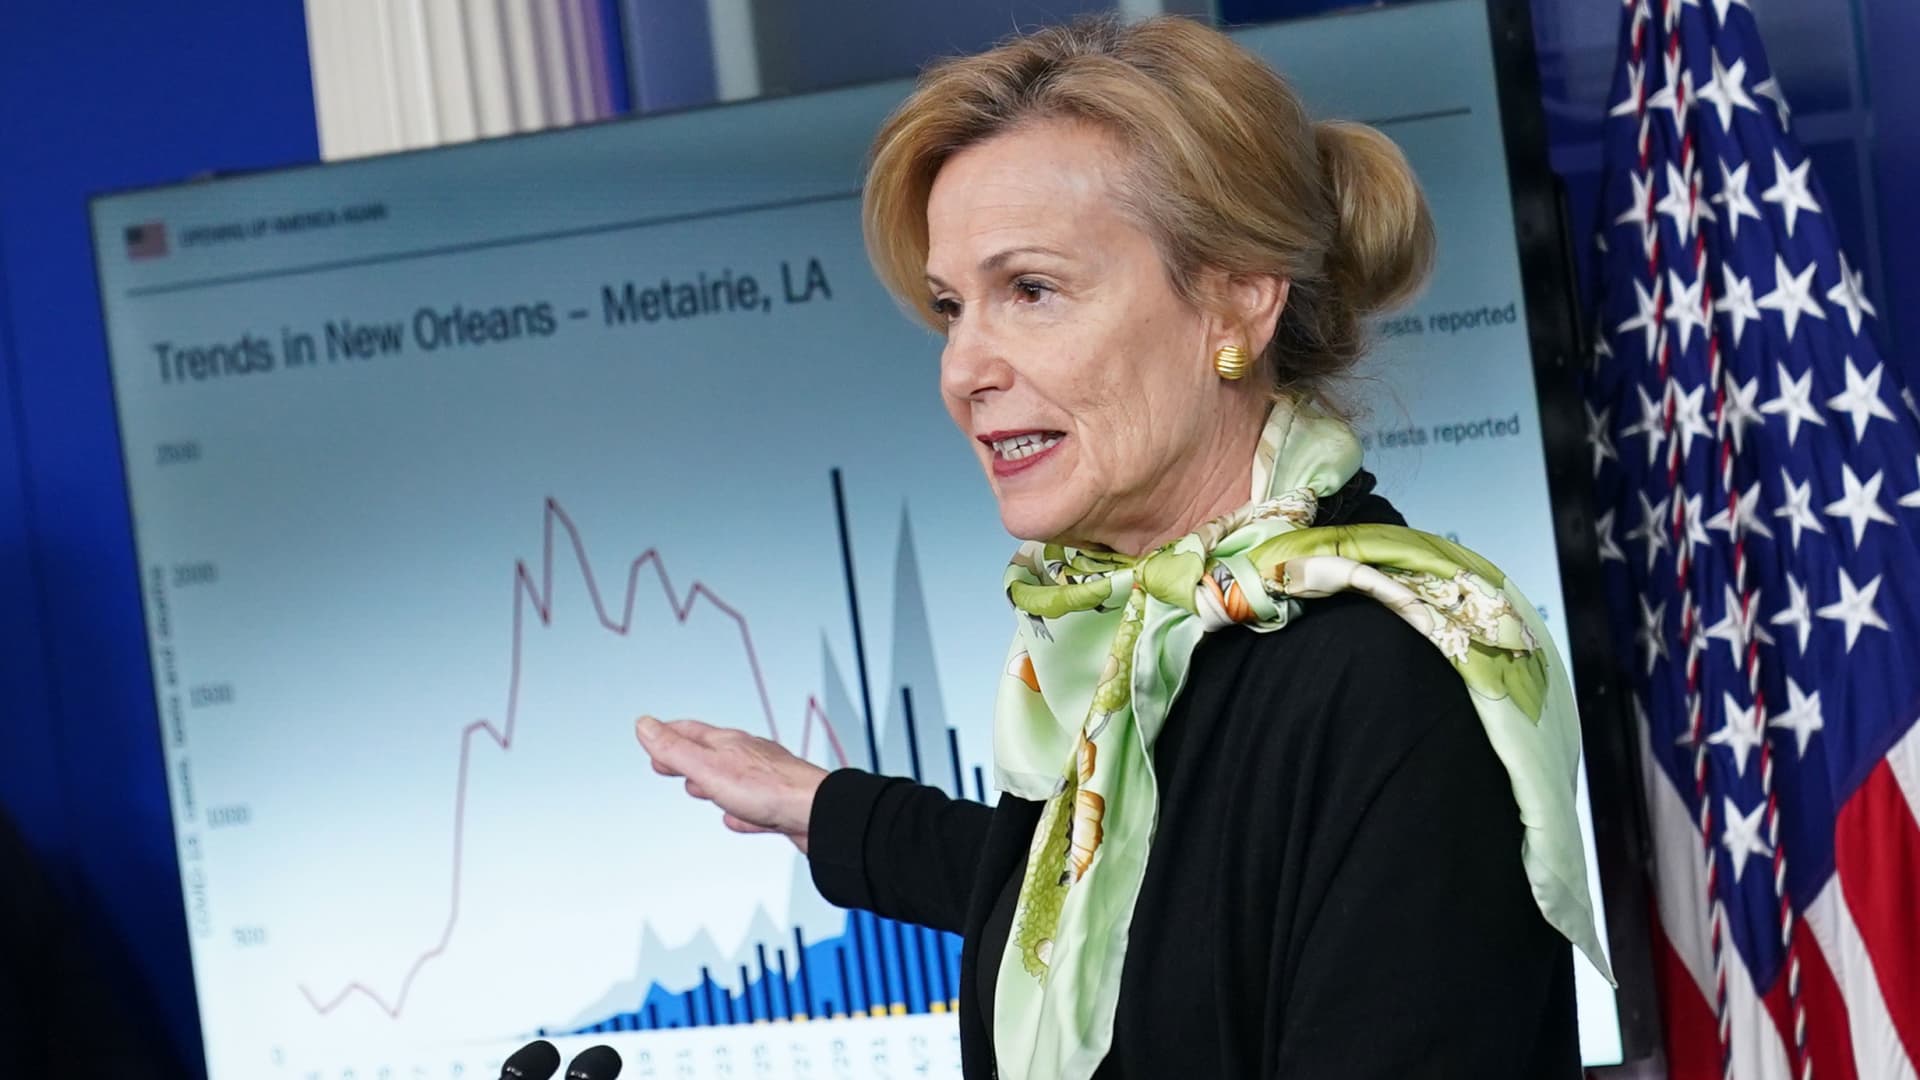 President Donald Trump listens as Response coordinator for White House Coronavirus Task Force Deborah Birx speaks during the daily briefing on the novel coronavirus, which causes COVID-19, in the Brady Briefing Room of the White House on April 16, 2020, in Washington, DC.